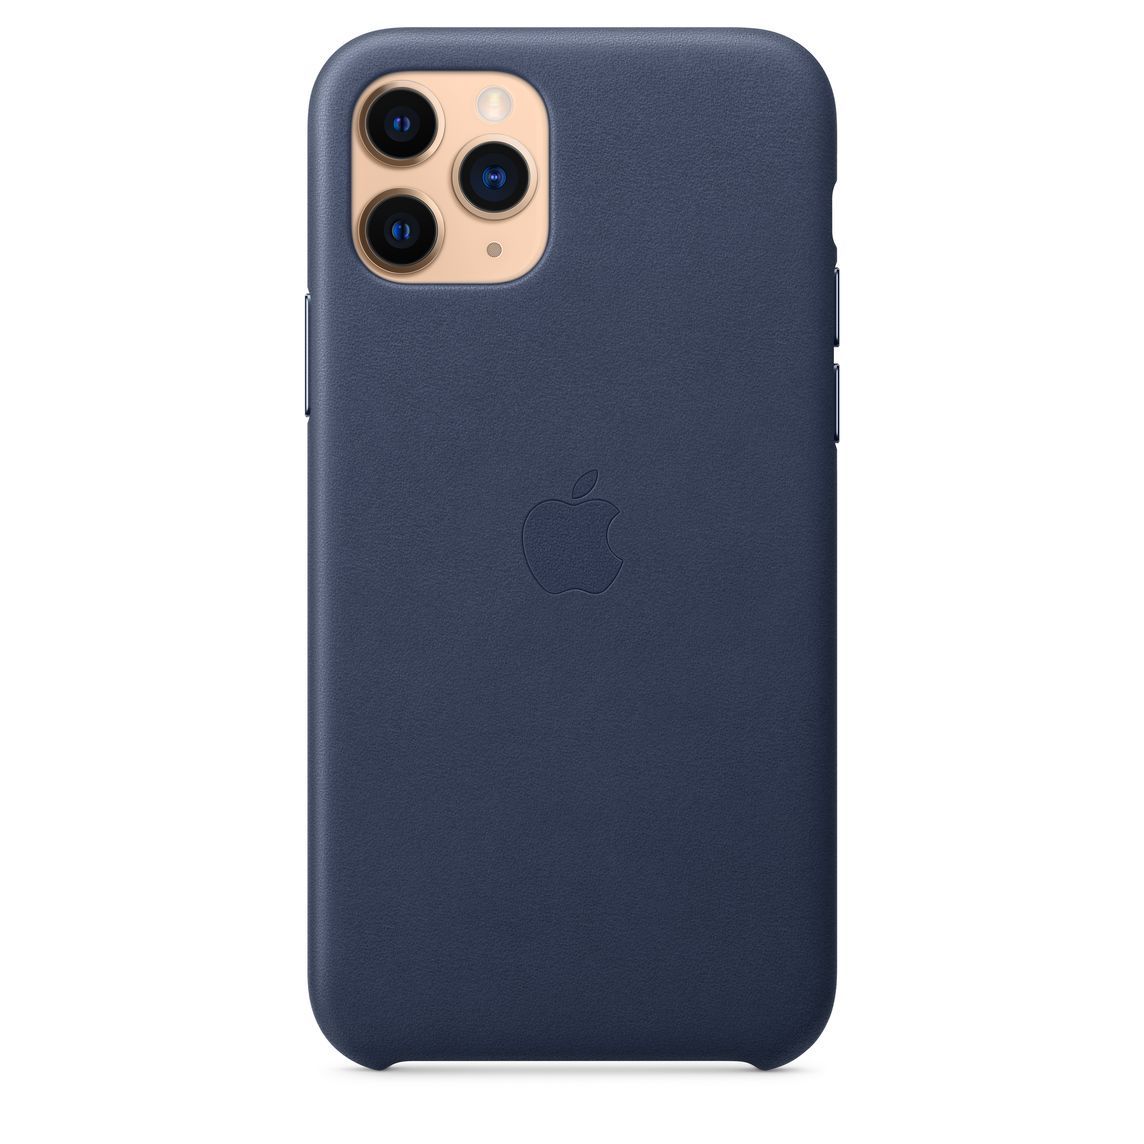 iPhone 11 Pro Leather Case - Saddle Brown | Apple (US)